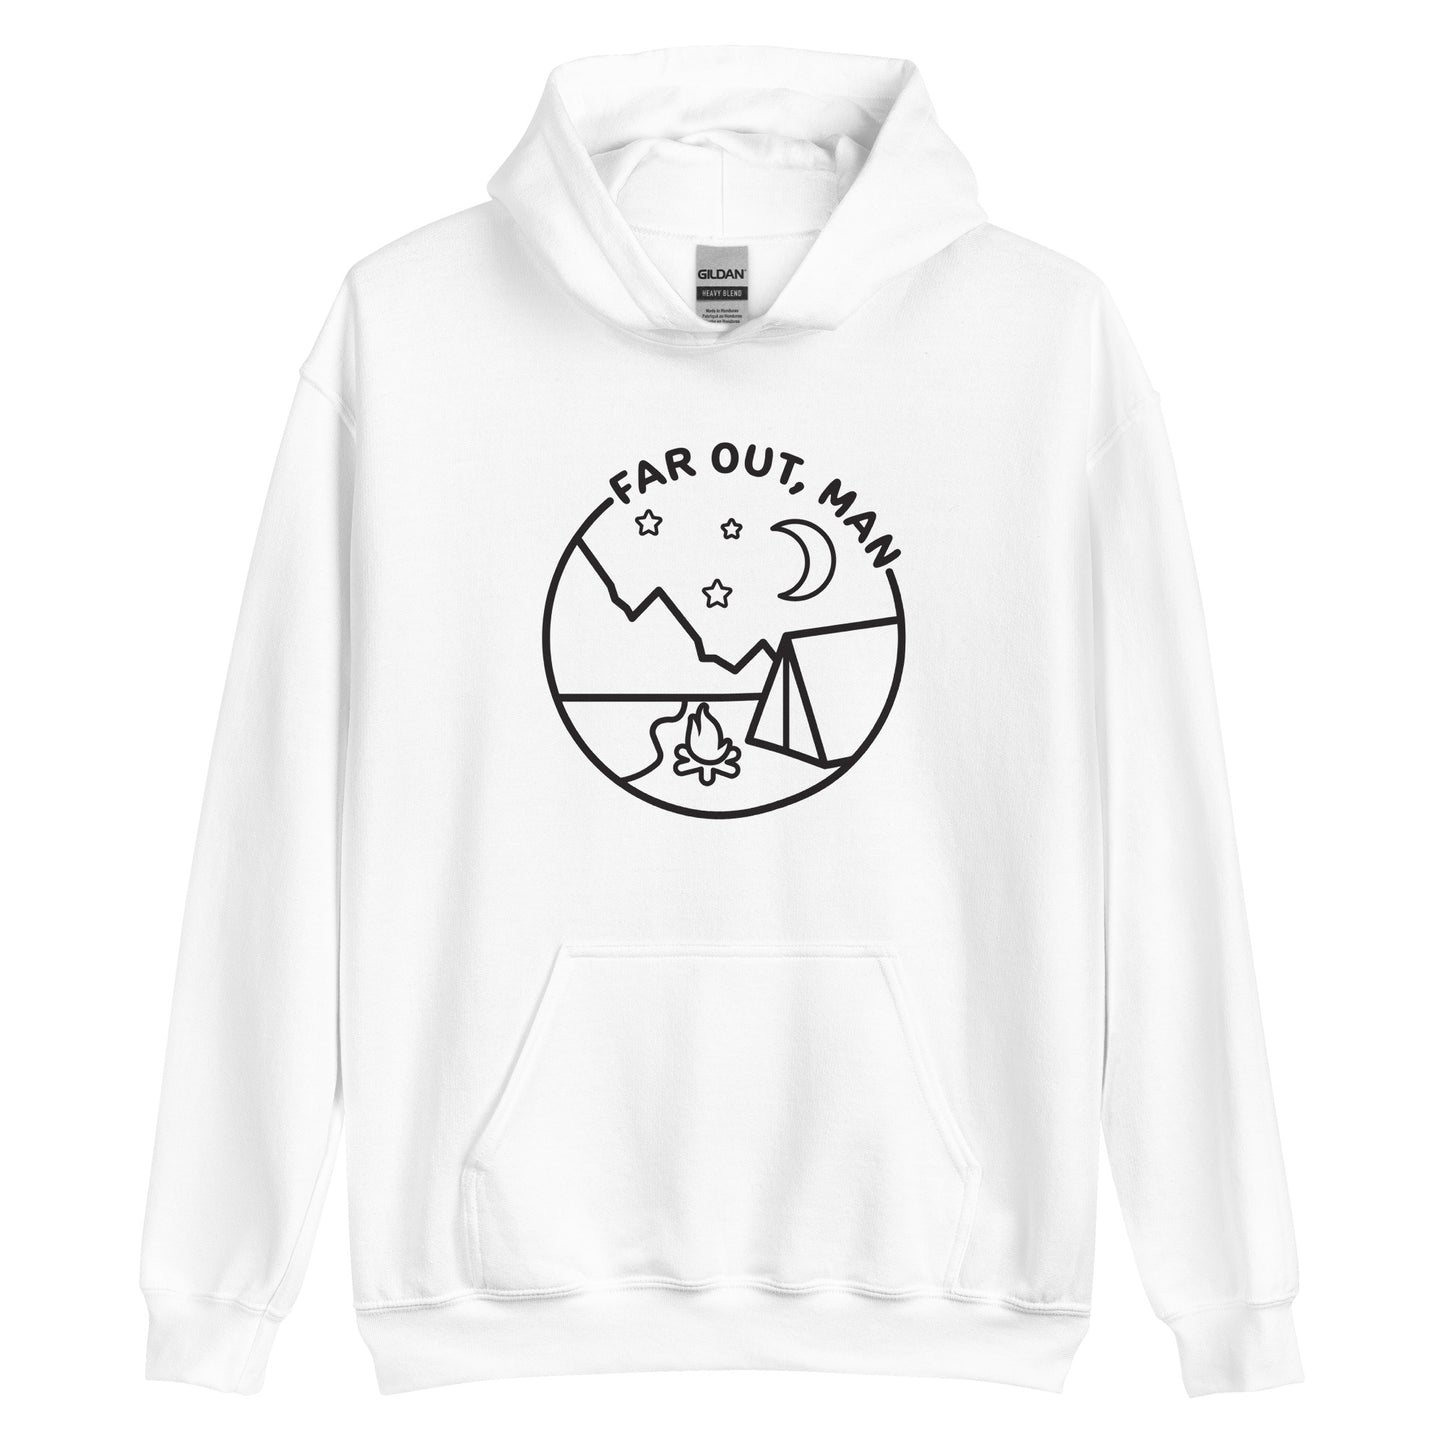 A white hooded sweatshirt featuring a black lineart illustration of a campfire and tent under a night sky. Text in an arc above the illustration reads "Far out, man".